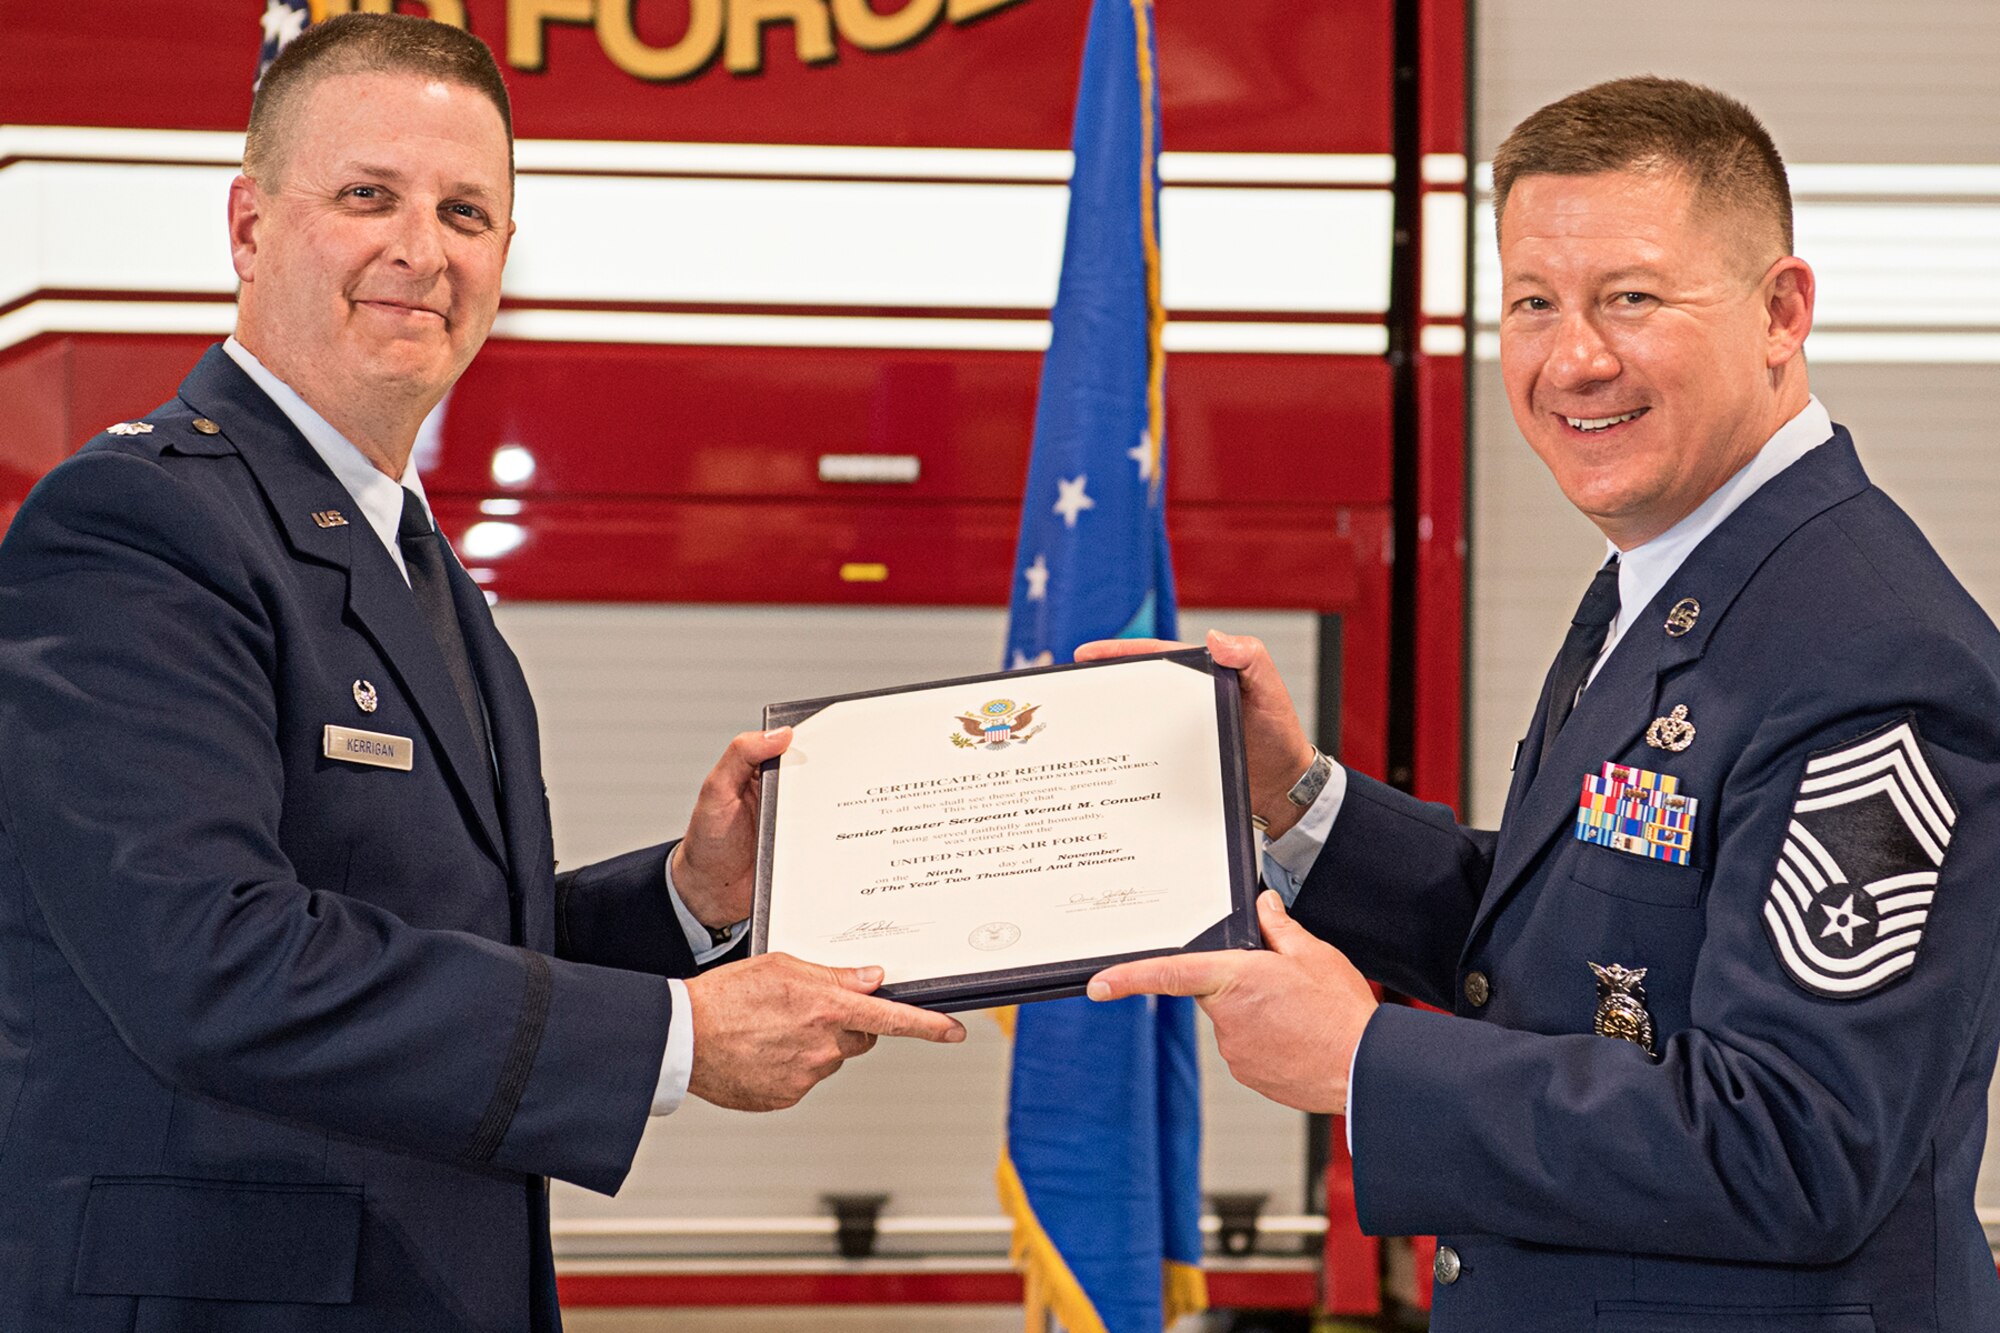 Dehner's retirement ceremony was held April 24, 2021 and was attended by family, friends and coworkers. (U.S. Air Force photo/Douglas Hays)